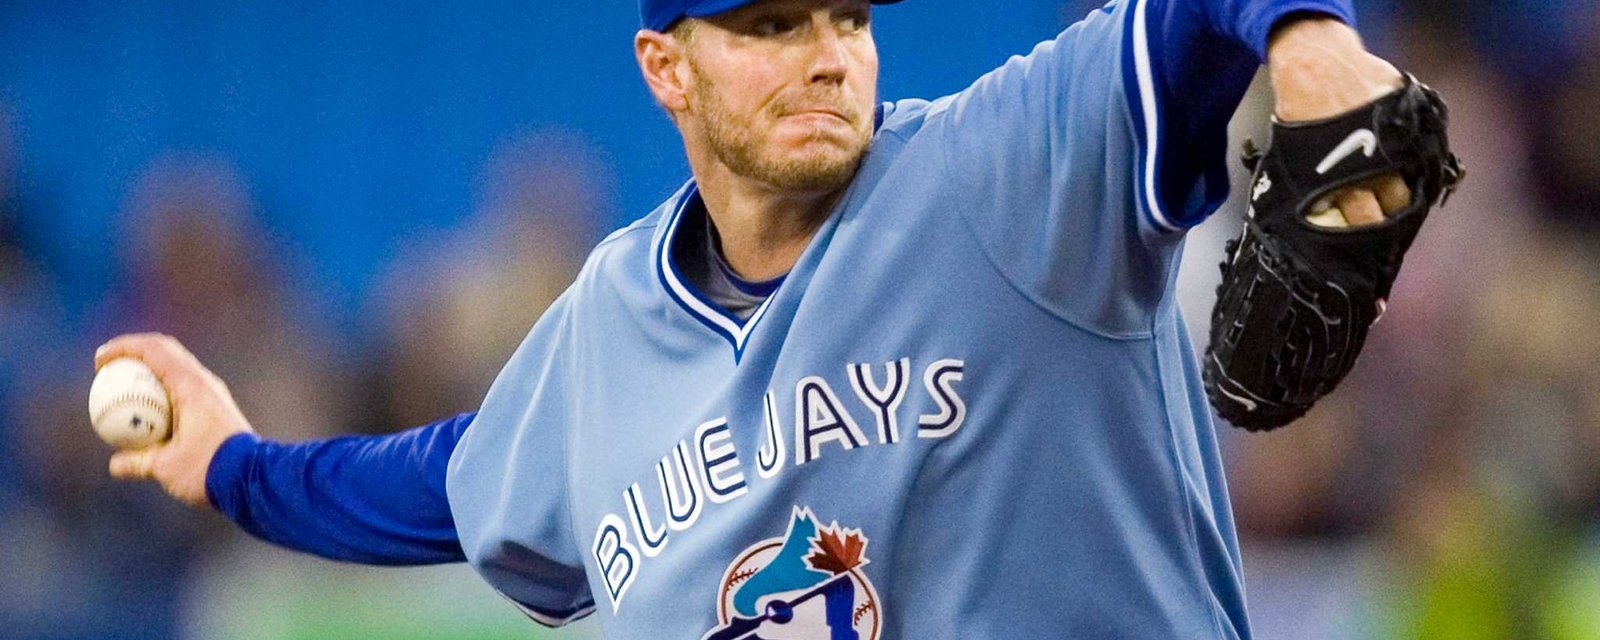 Breaking: Plane registered to former Blue Jays star Roy Halladay has crashed. 